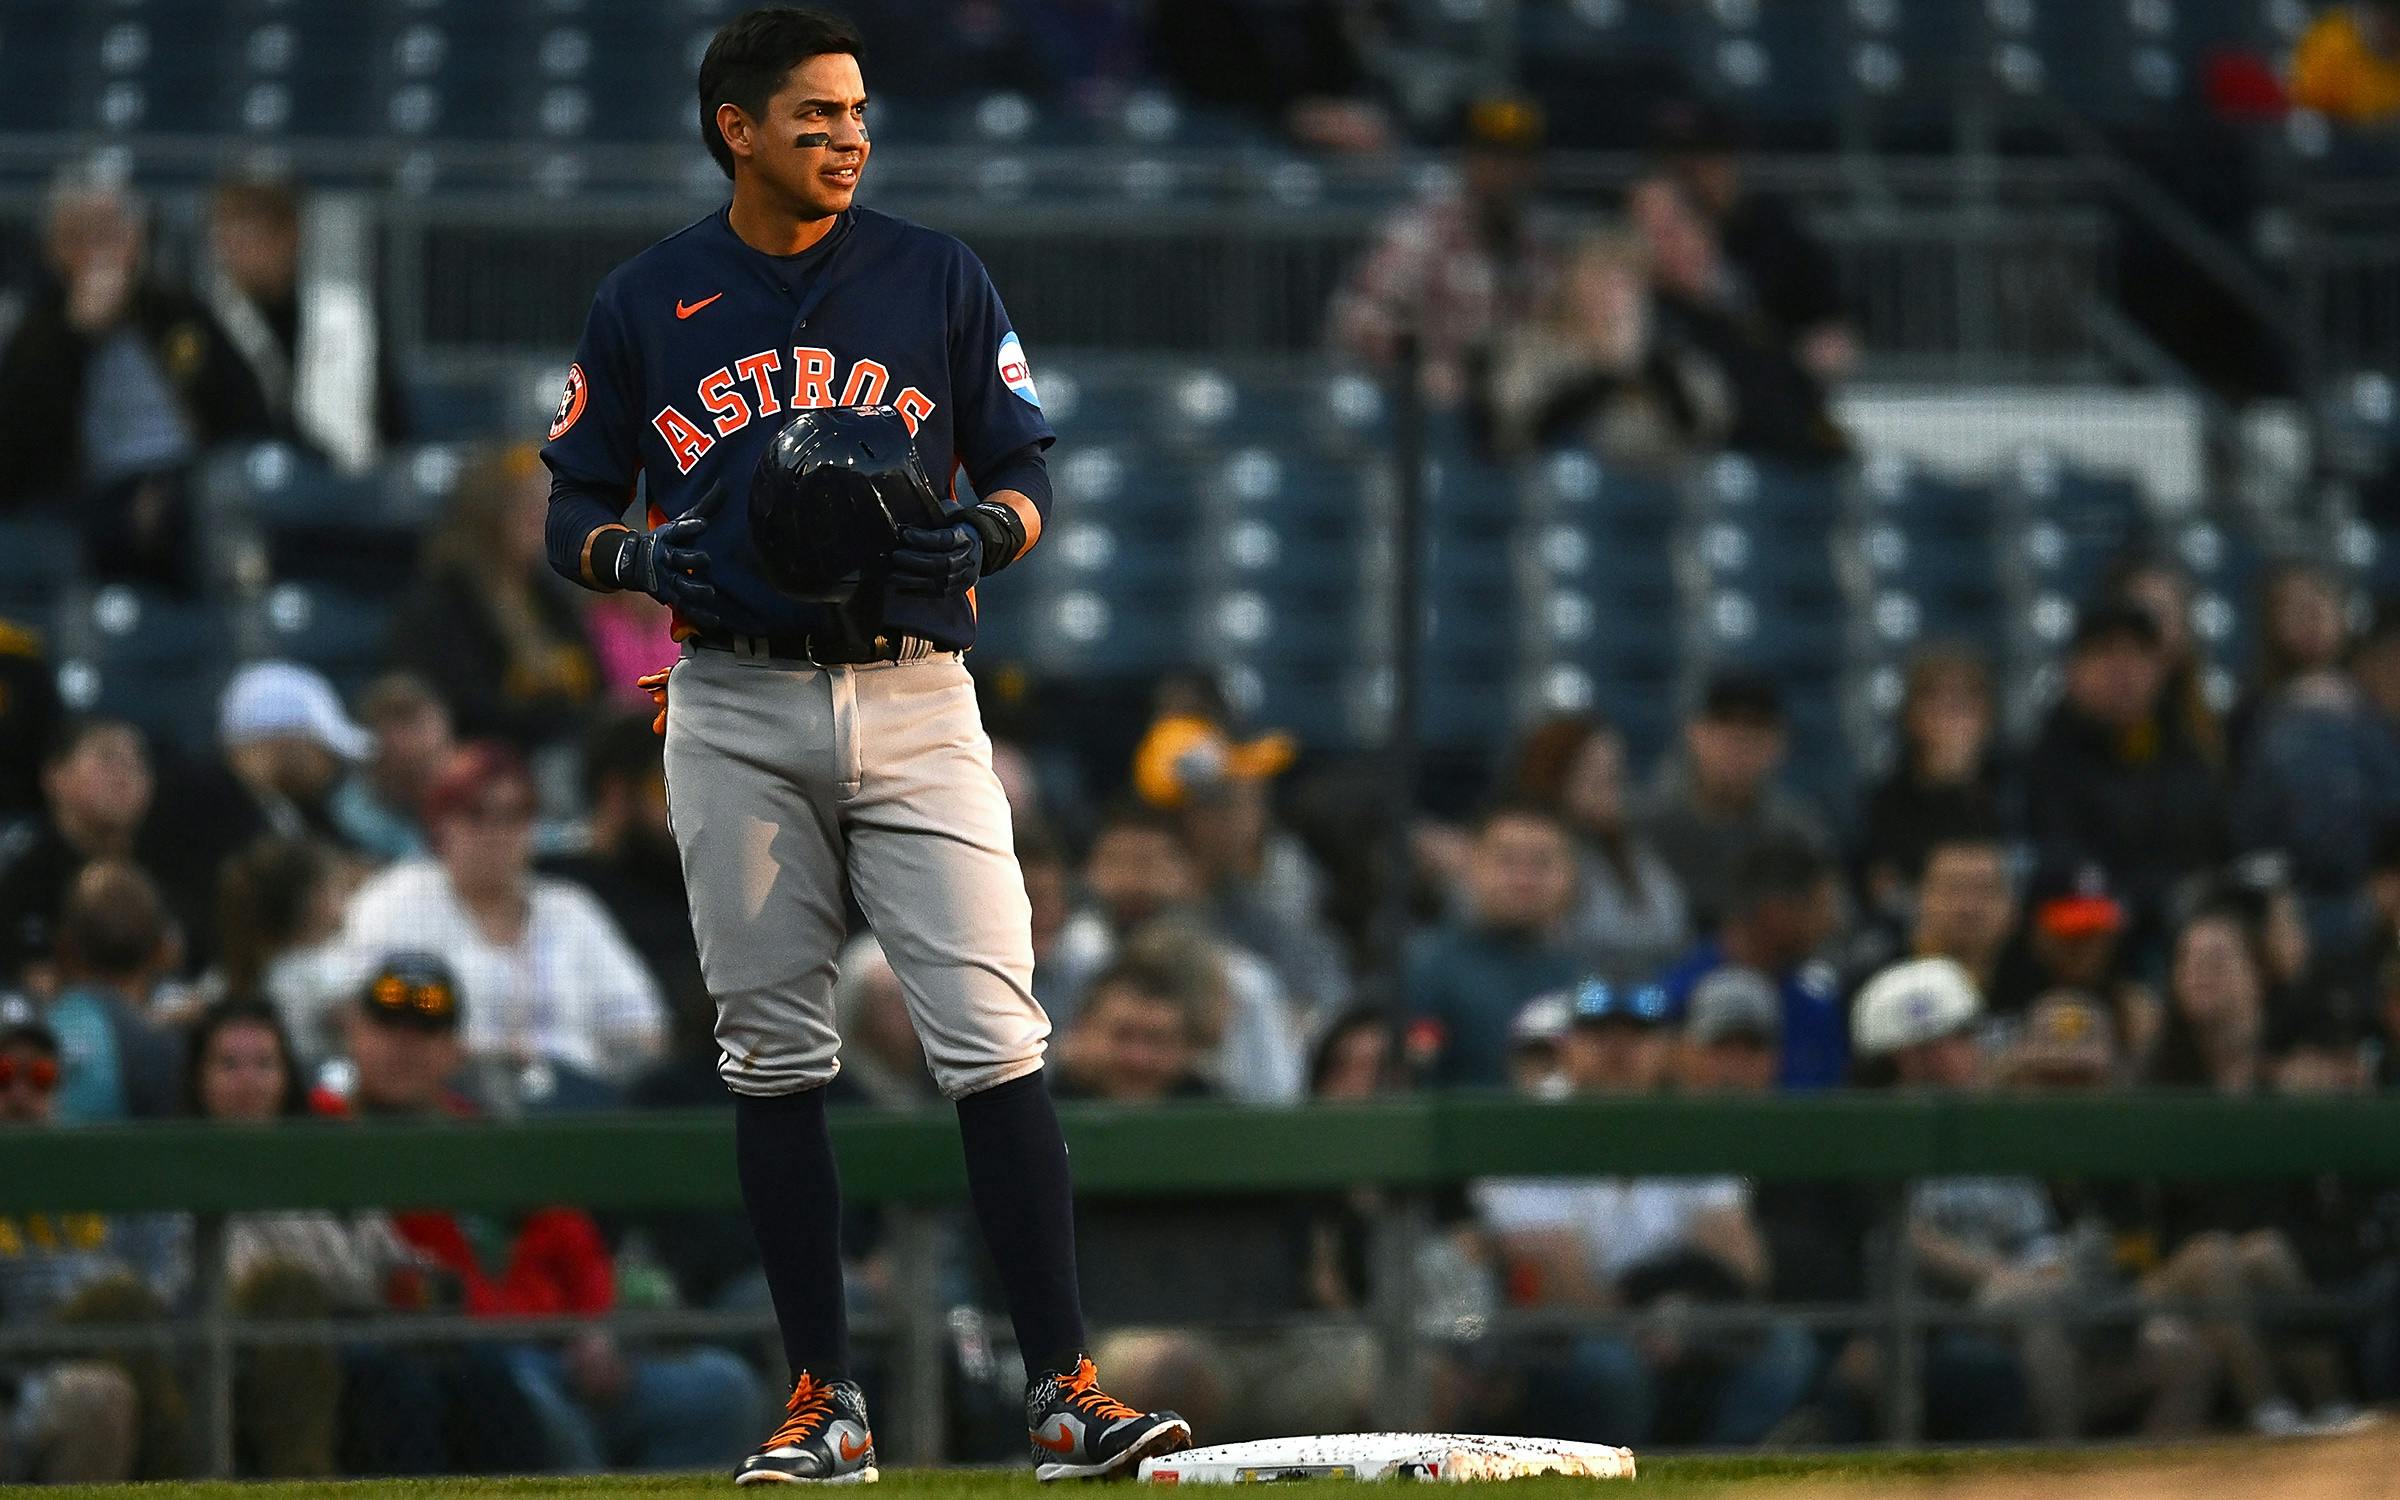 Houston Astros: With dynasty established, sustaining it is the goal